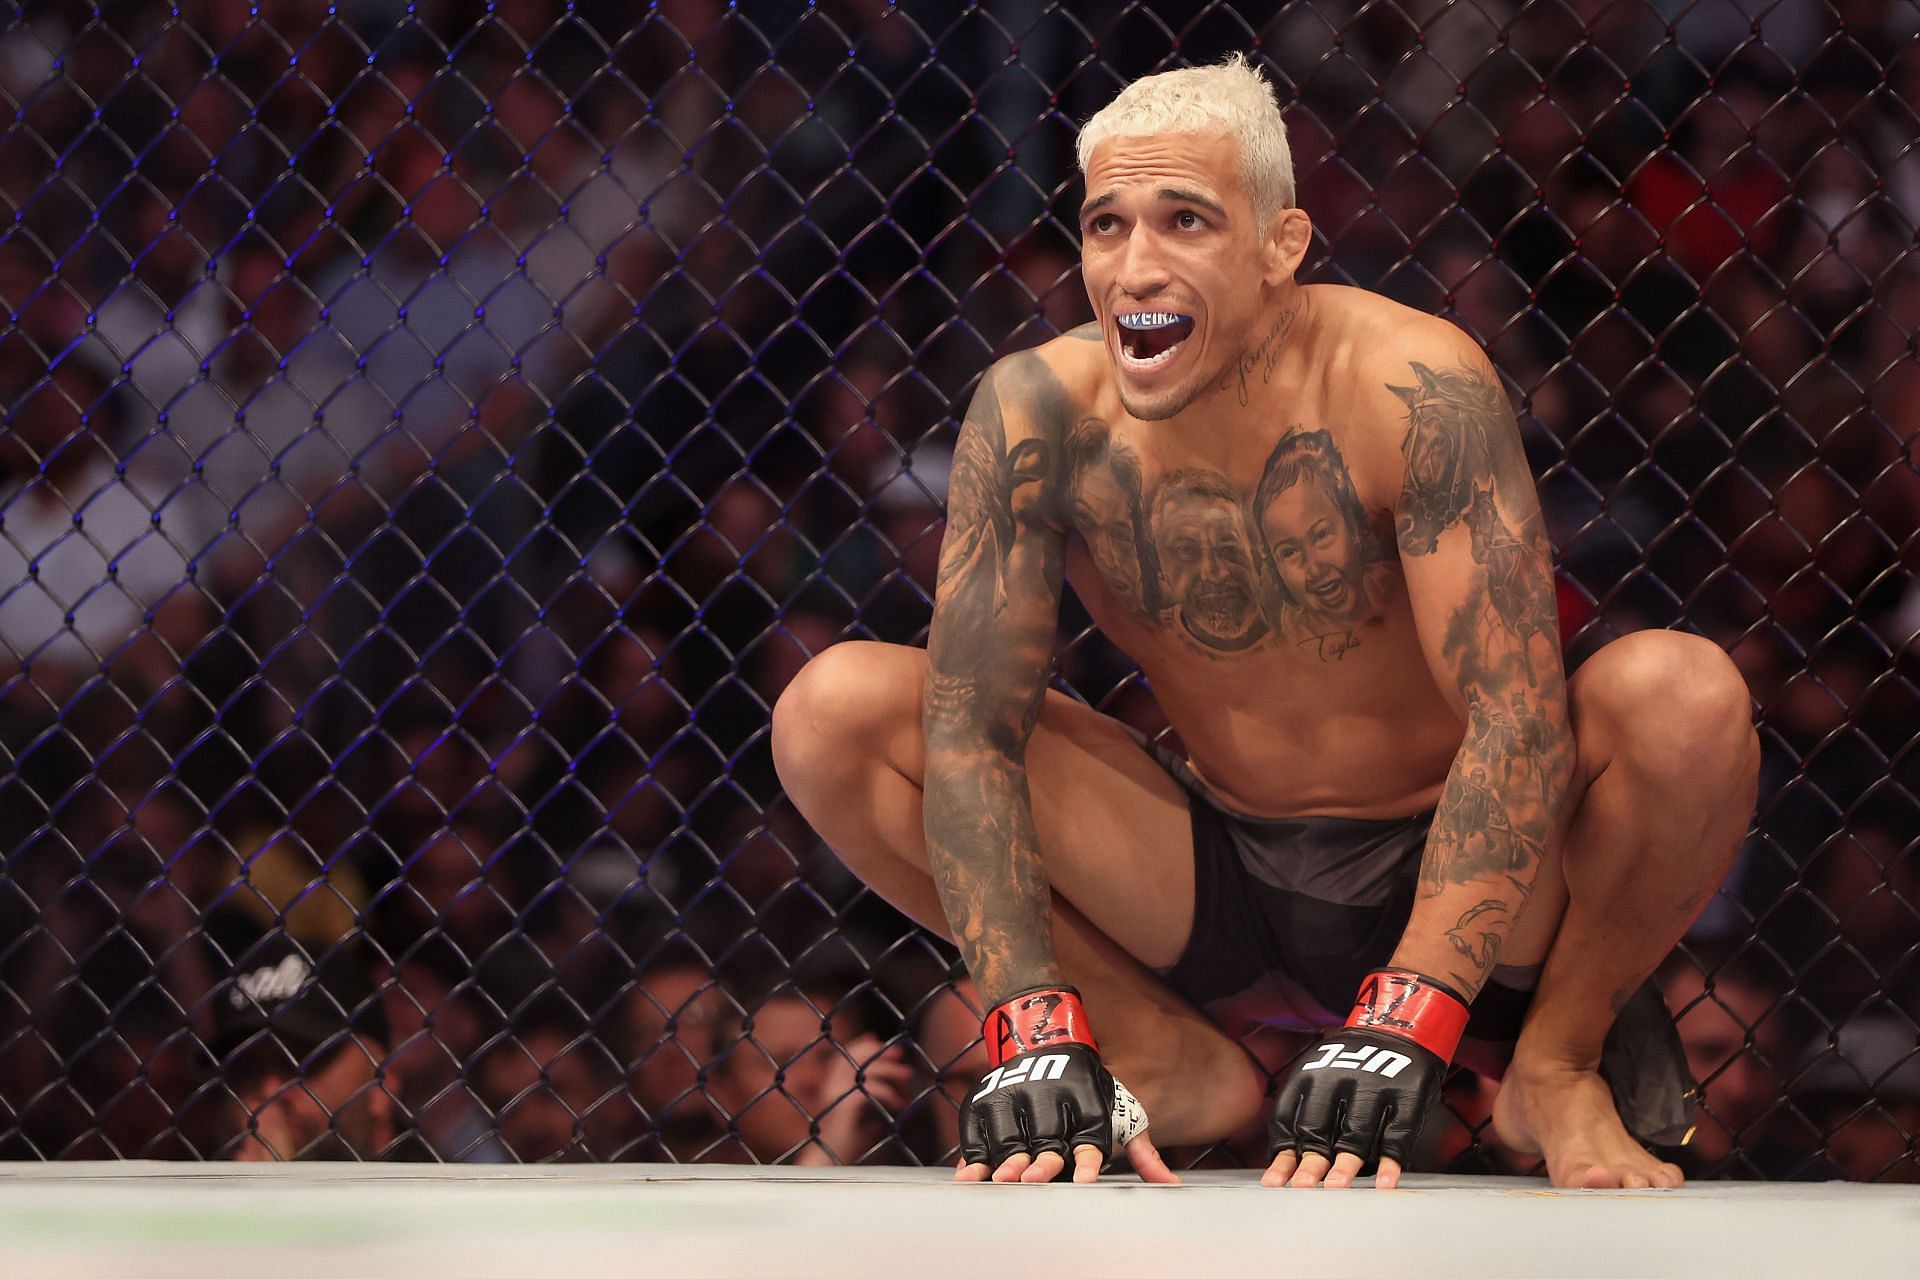 Charles Oliveira in the cage before his fight at UFC 274: Oliveira vs. Gaethje [Image courtesy of Getty]